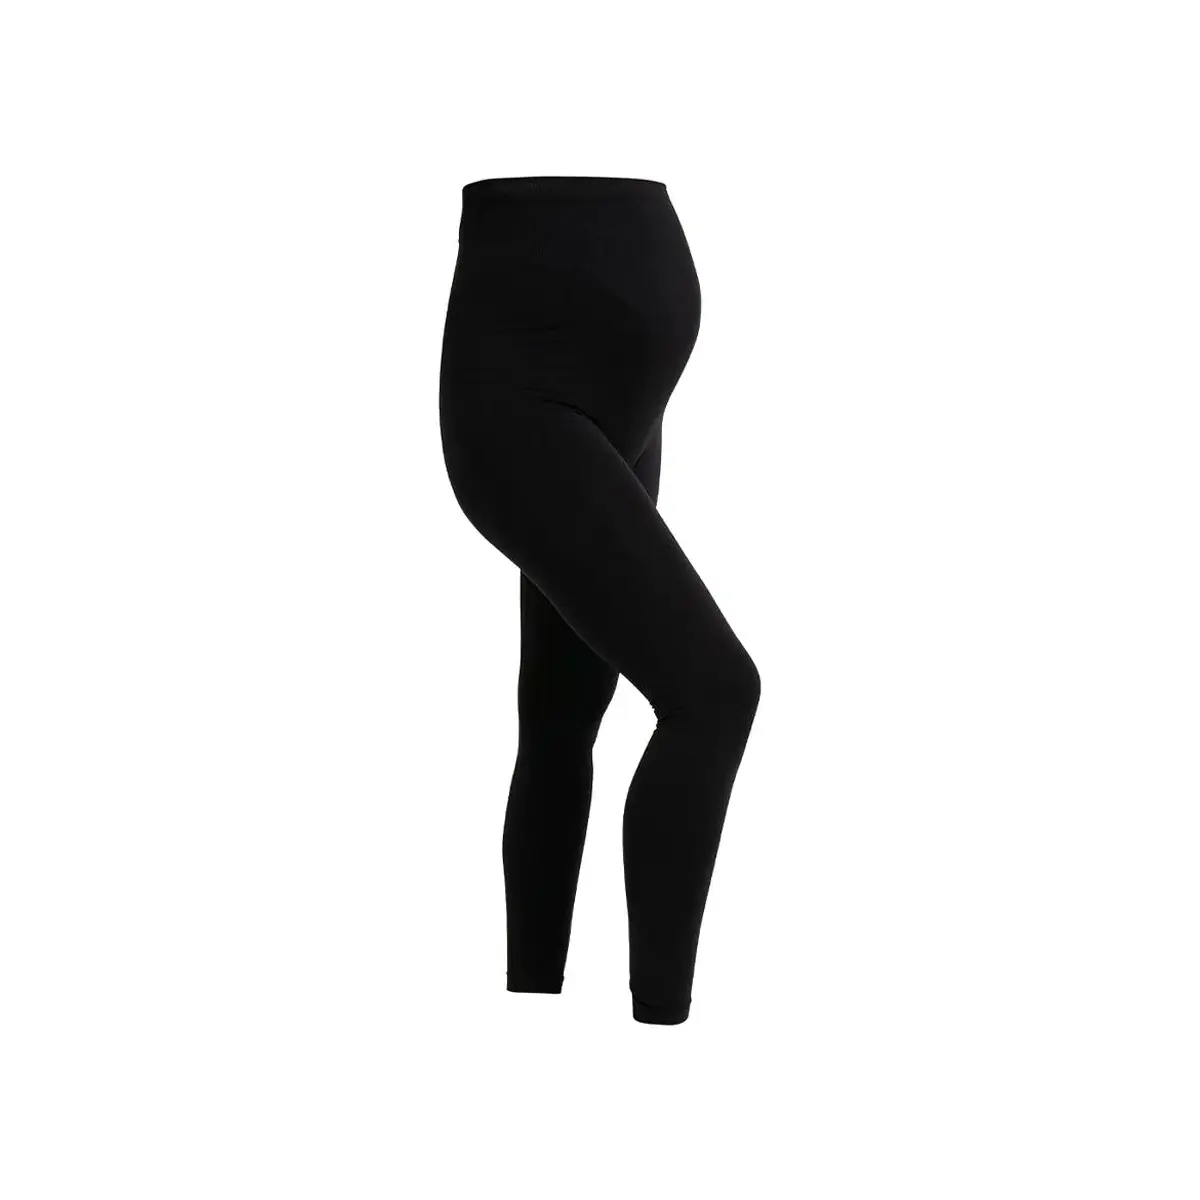 Image of Carriwell Maternity Support Leggings - Black (Size - LARGE)